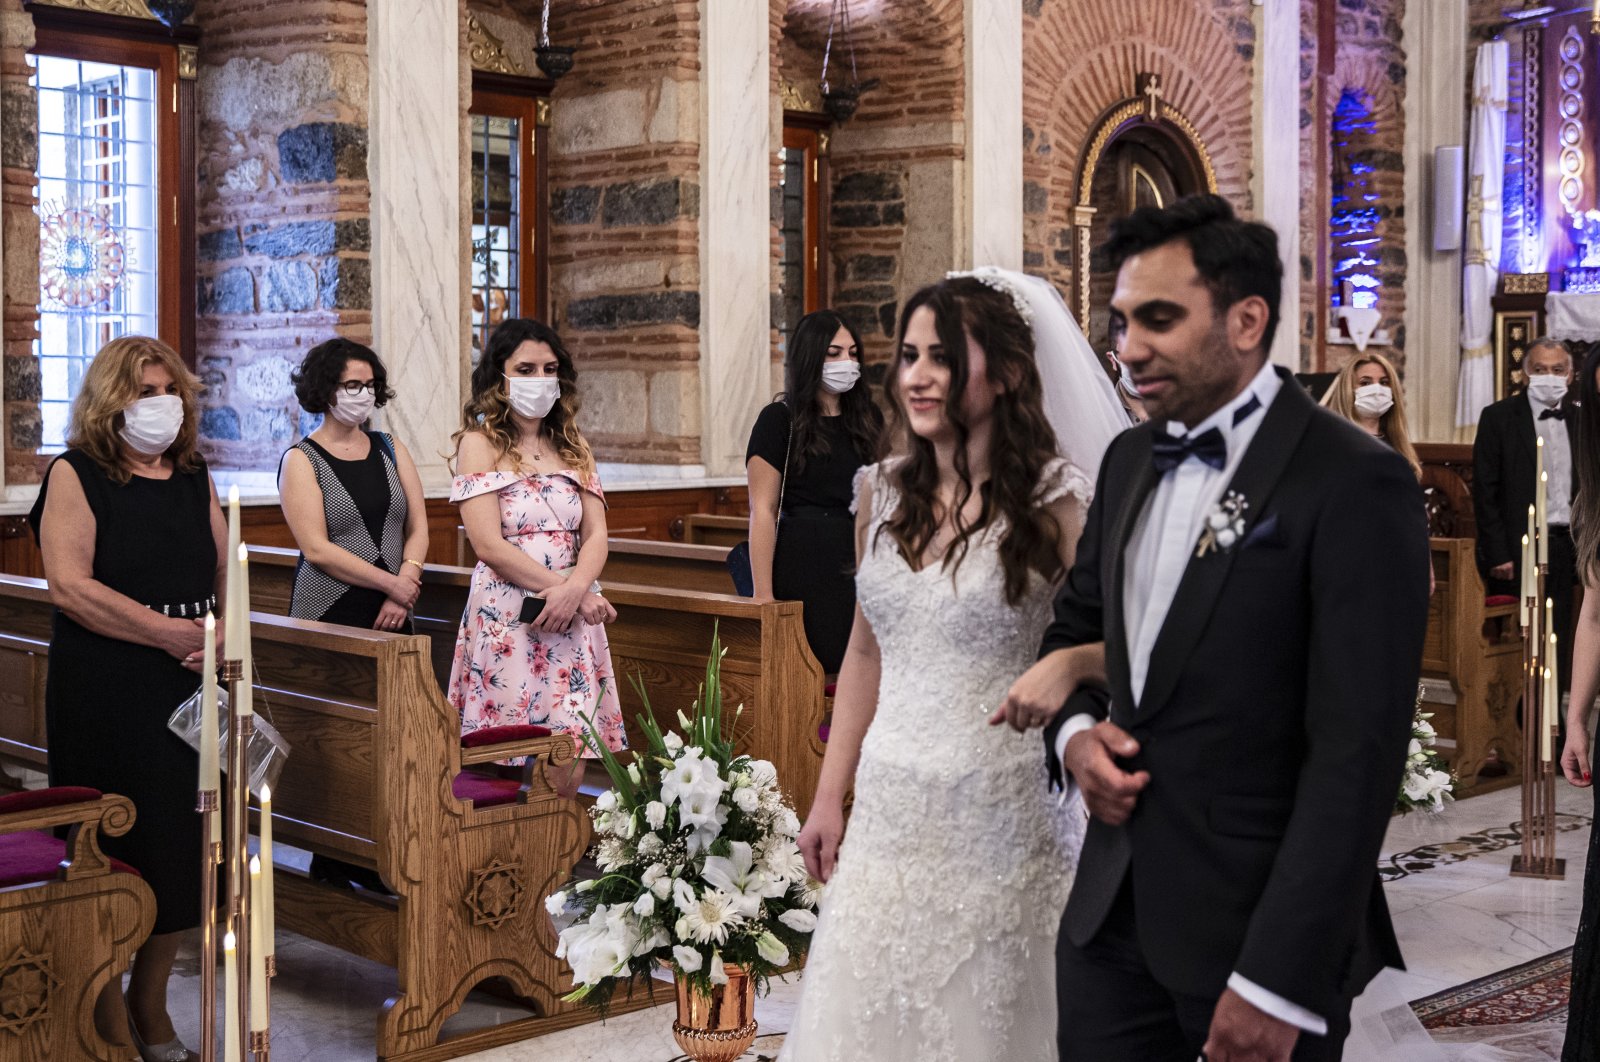 Newlyweds Iskender and Melek Acar walk to the altar as the only people in the church not wearing masks, in Istanbul, Turkey, June 14, 2020. (DHA Photo)